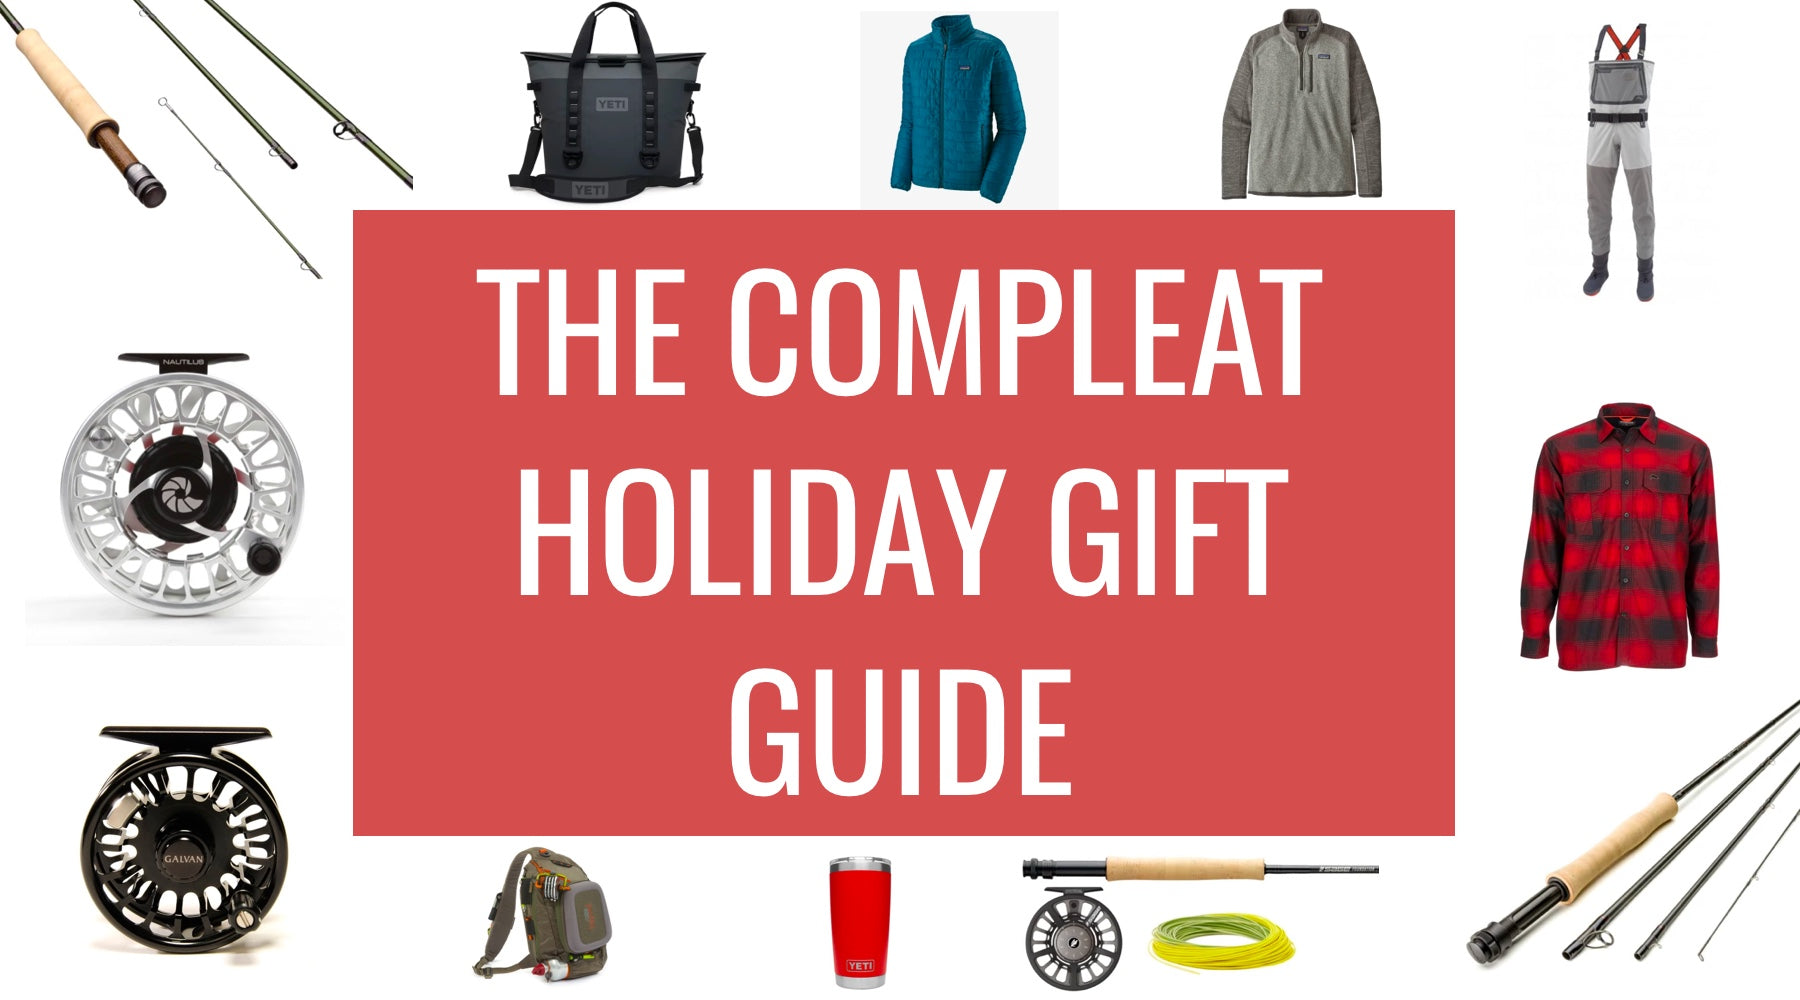 The Compleat 2020 Holiday Gift Guide